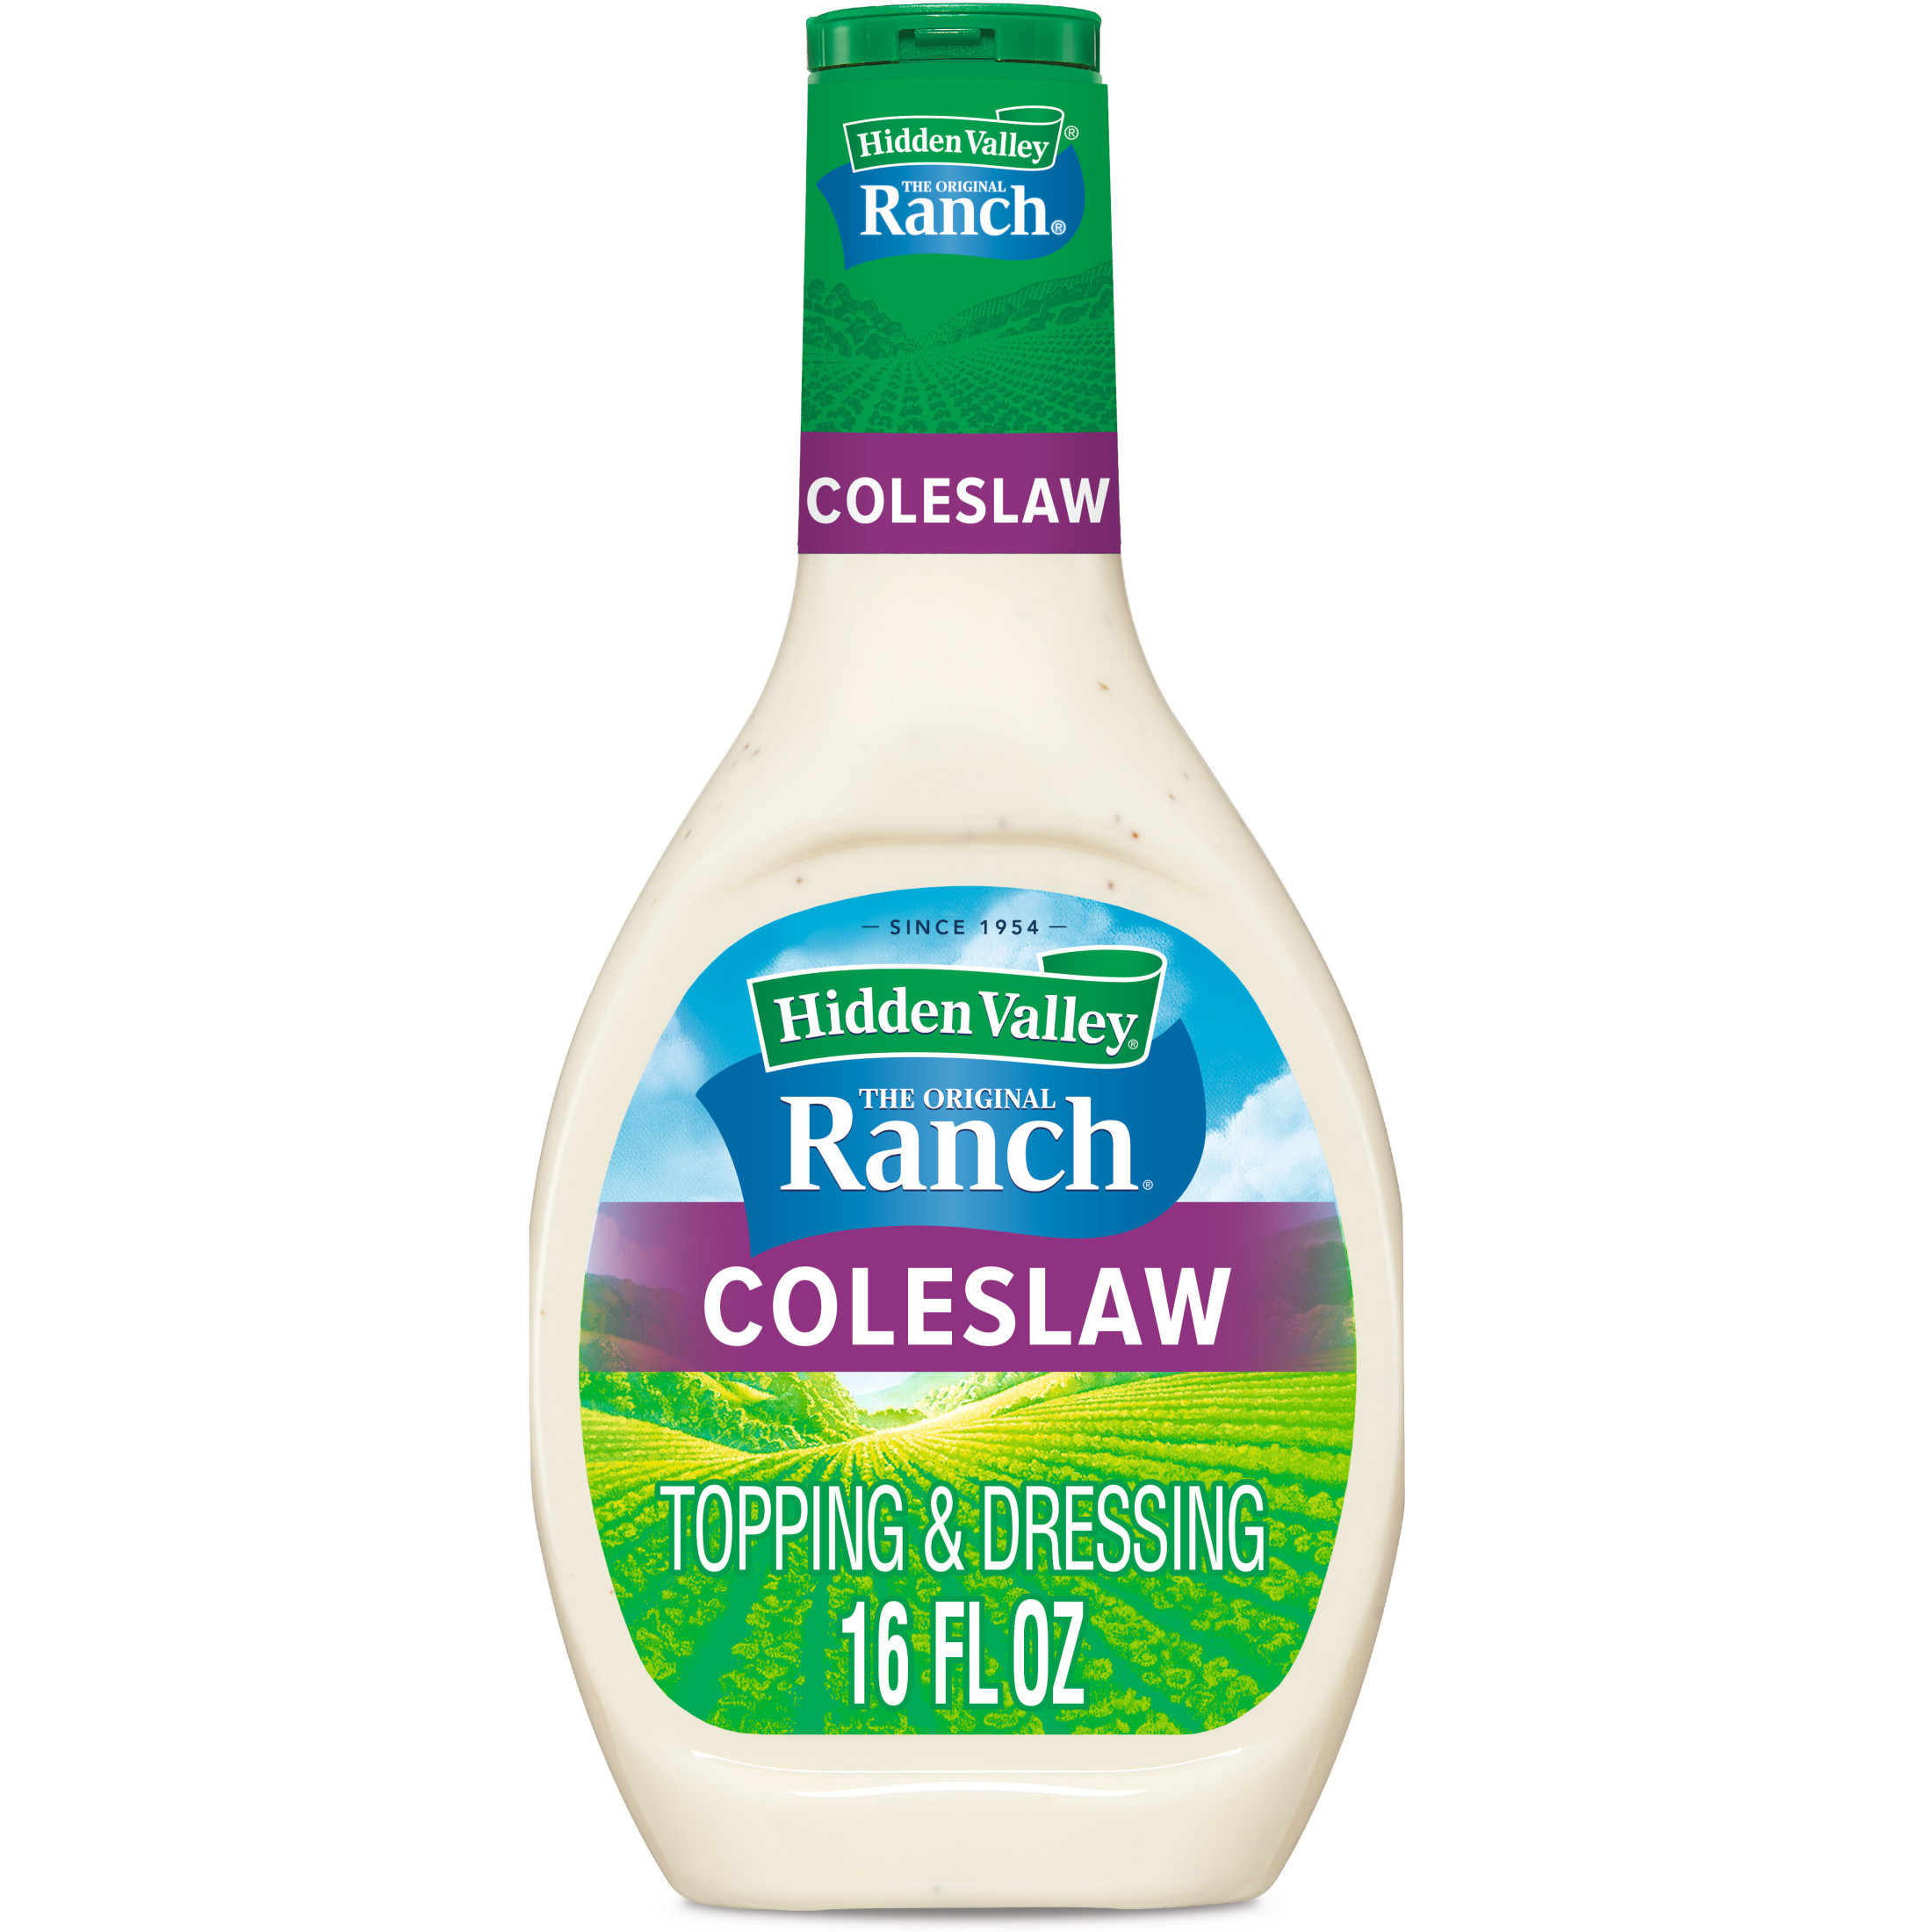 Hidden Valley Gluten Free Coleslaw Salad Dressing and Topping, 16 fl oz - image 1 of 6